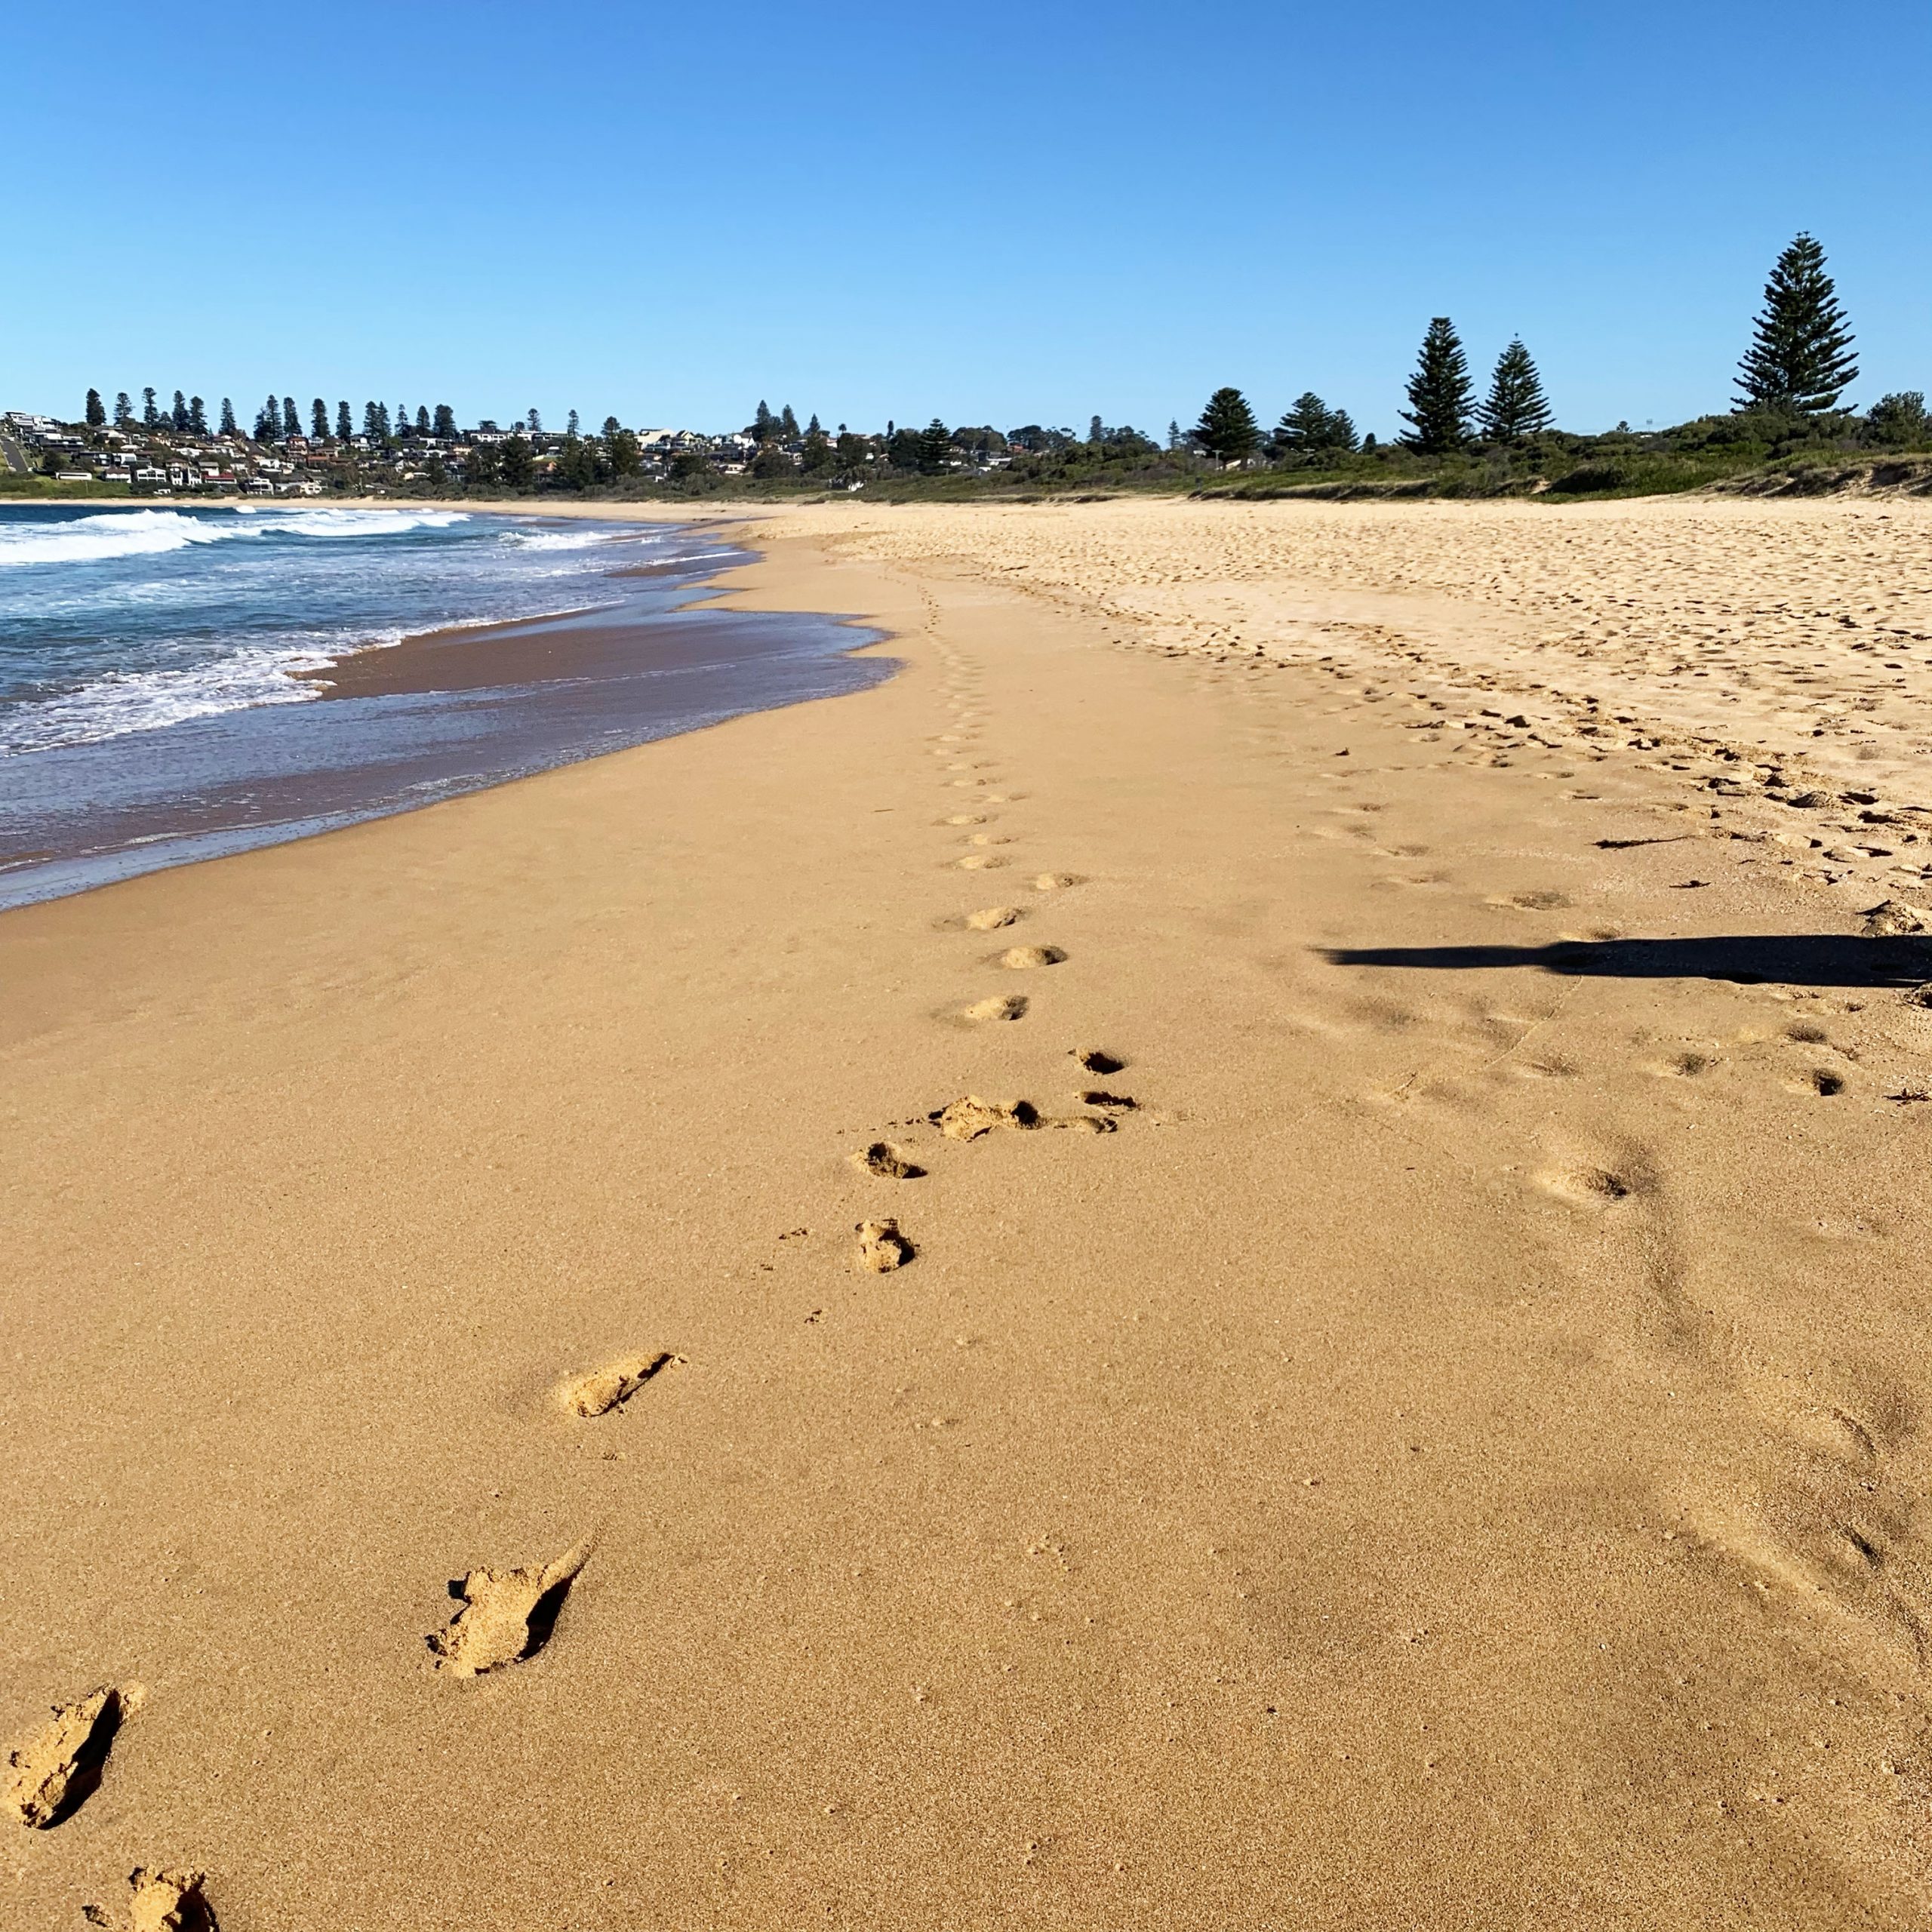 photo of beach with footprints